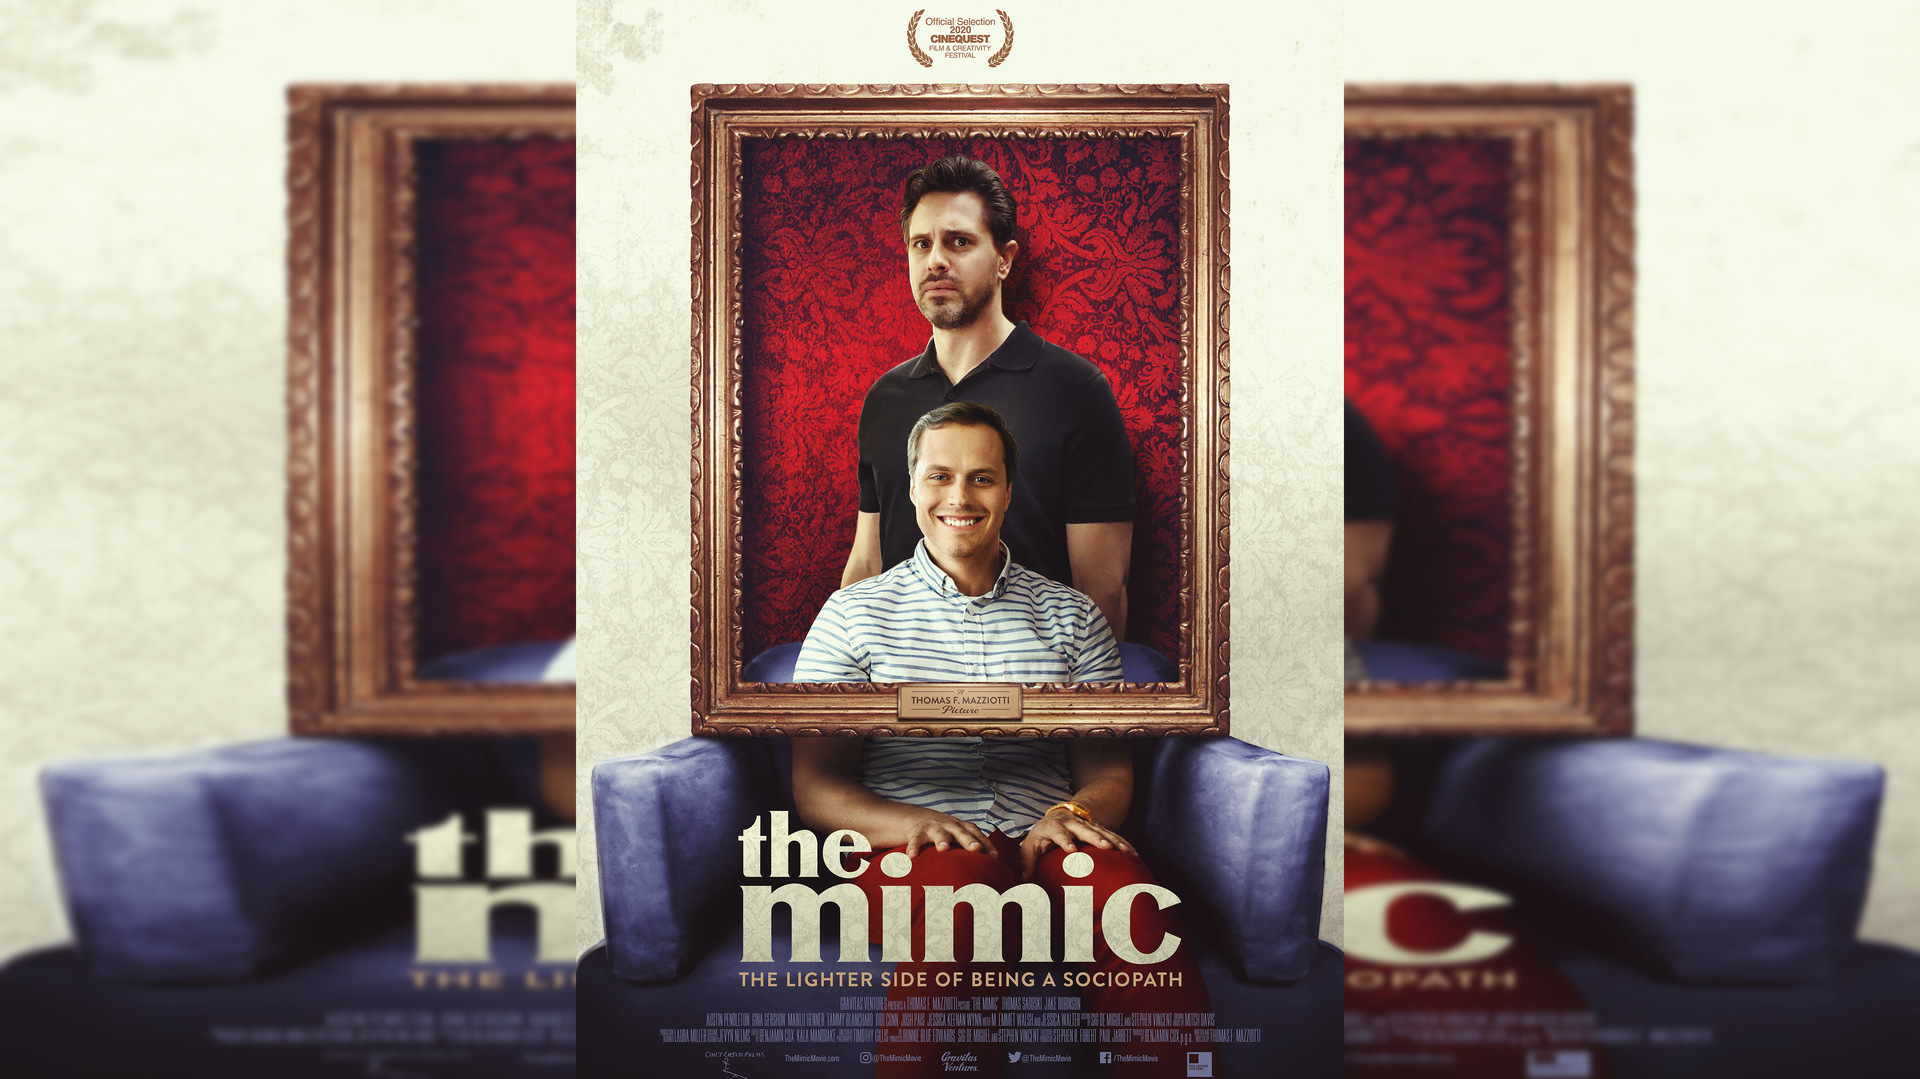 Festival film review: The Mimic